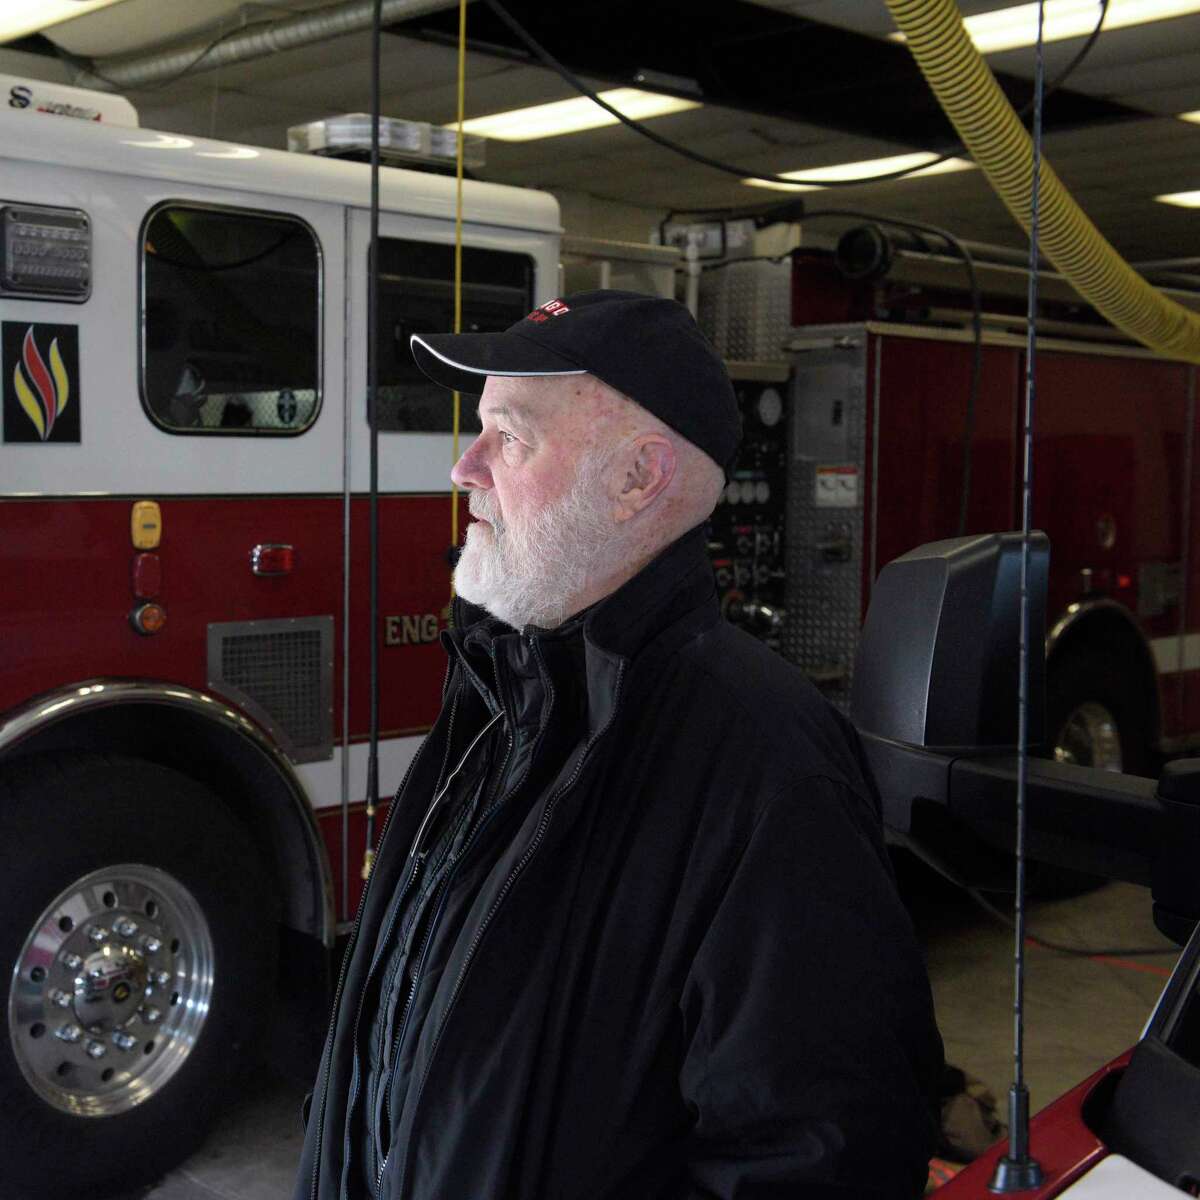 Filmmaker Joe Lane is producing a documentary called “Partners,” highlighting the lives of Ridgefield’s firefighters, their relationship with the community and the intricacies of the fire service. Lane was at the Catoonah Street headquarters waiting to ride along on calls with career members to get a feel for the job. Tuesday, March 29, 2020, Ridgefield, Conn.